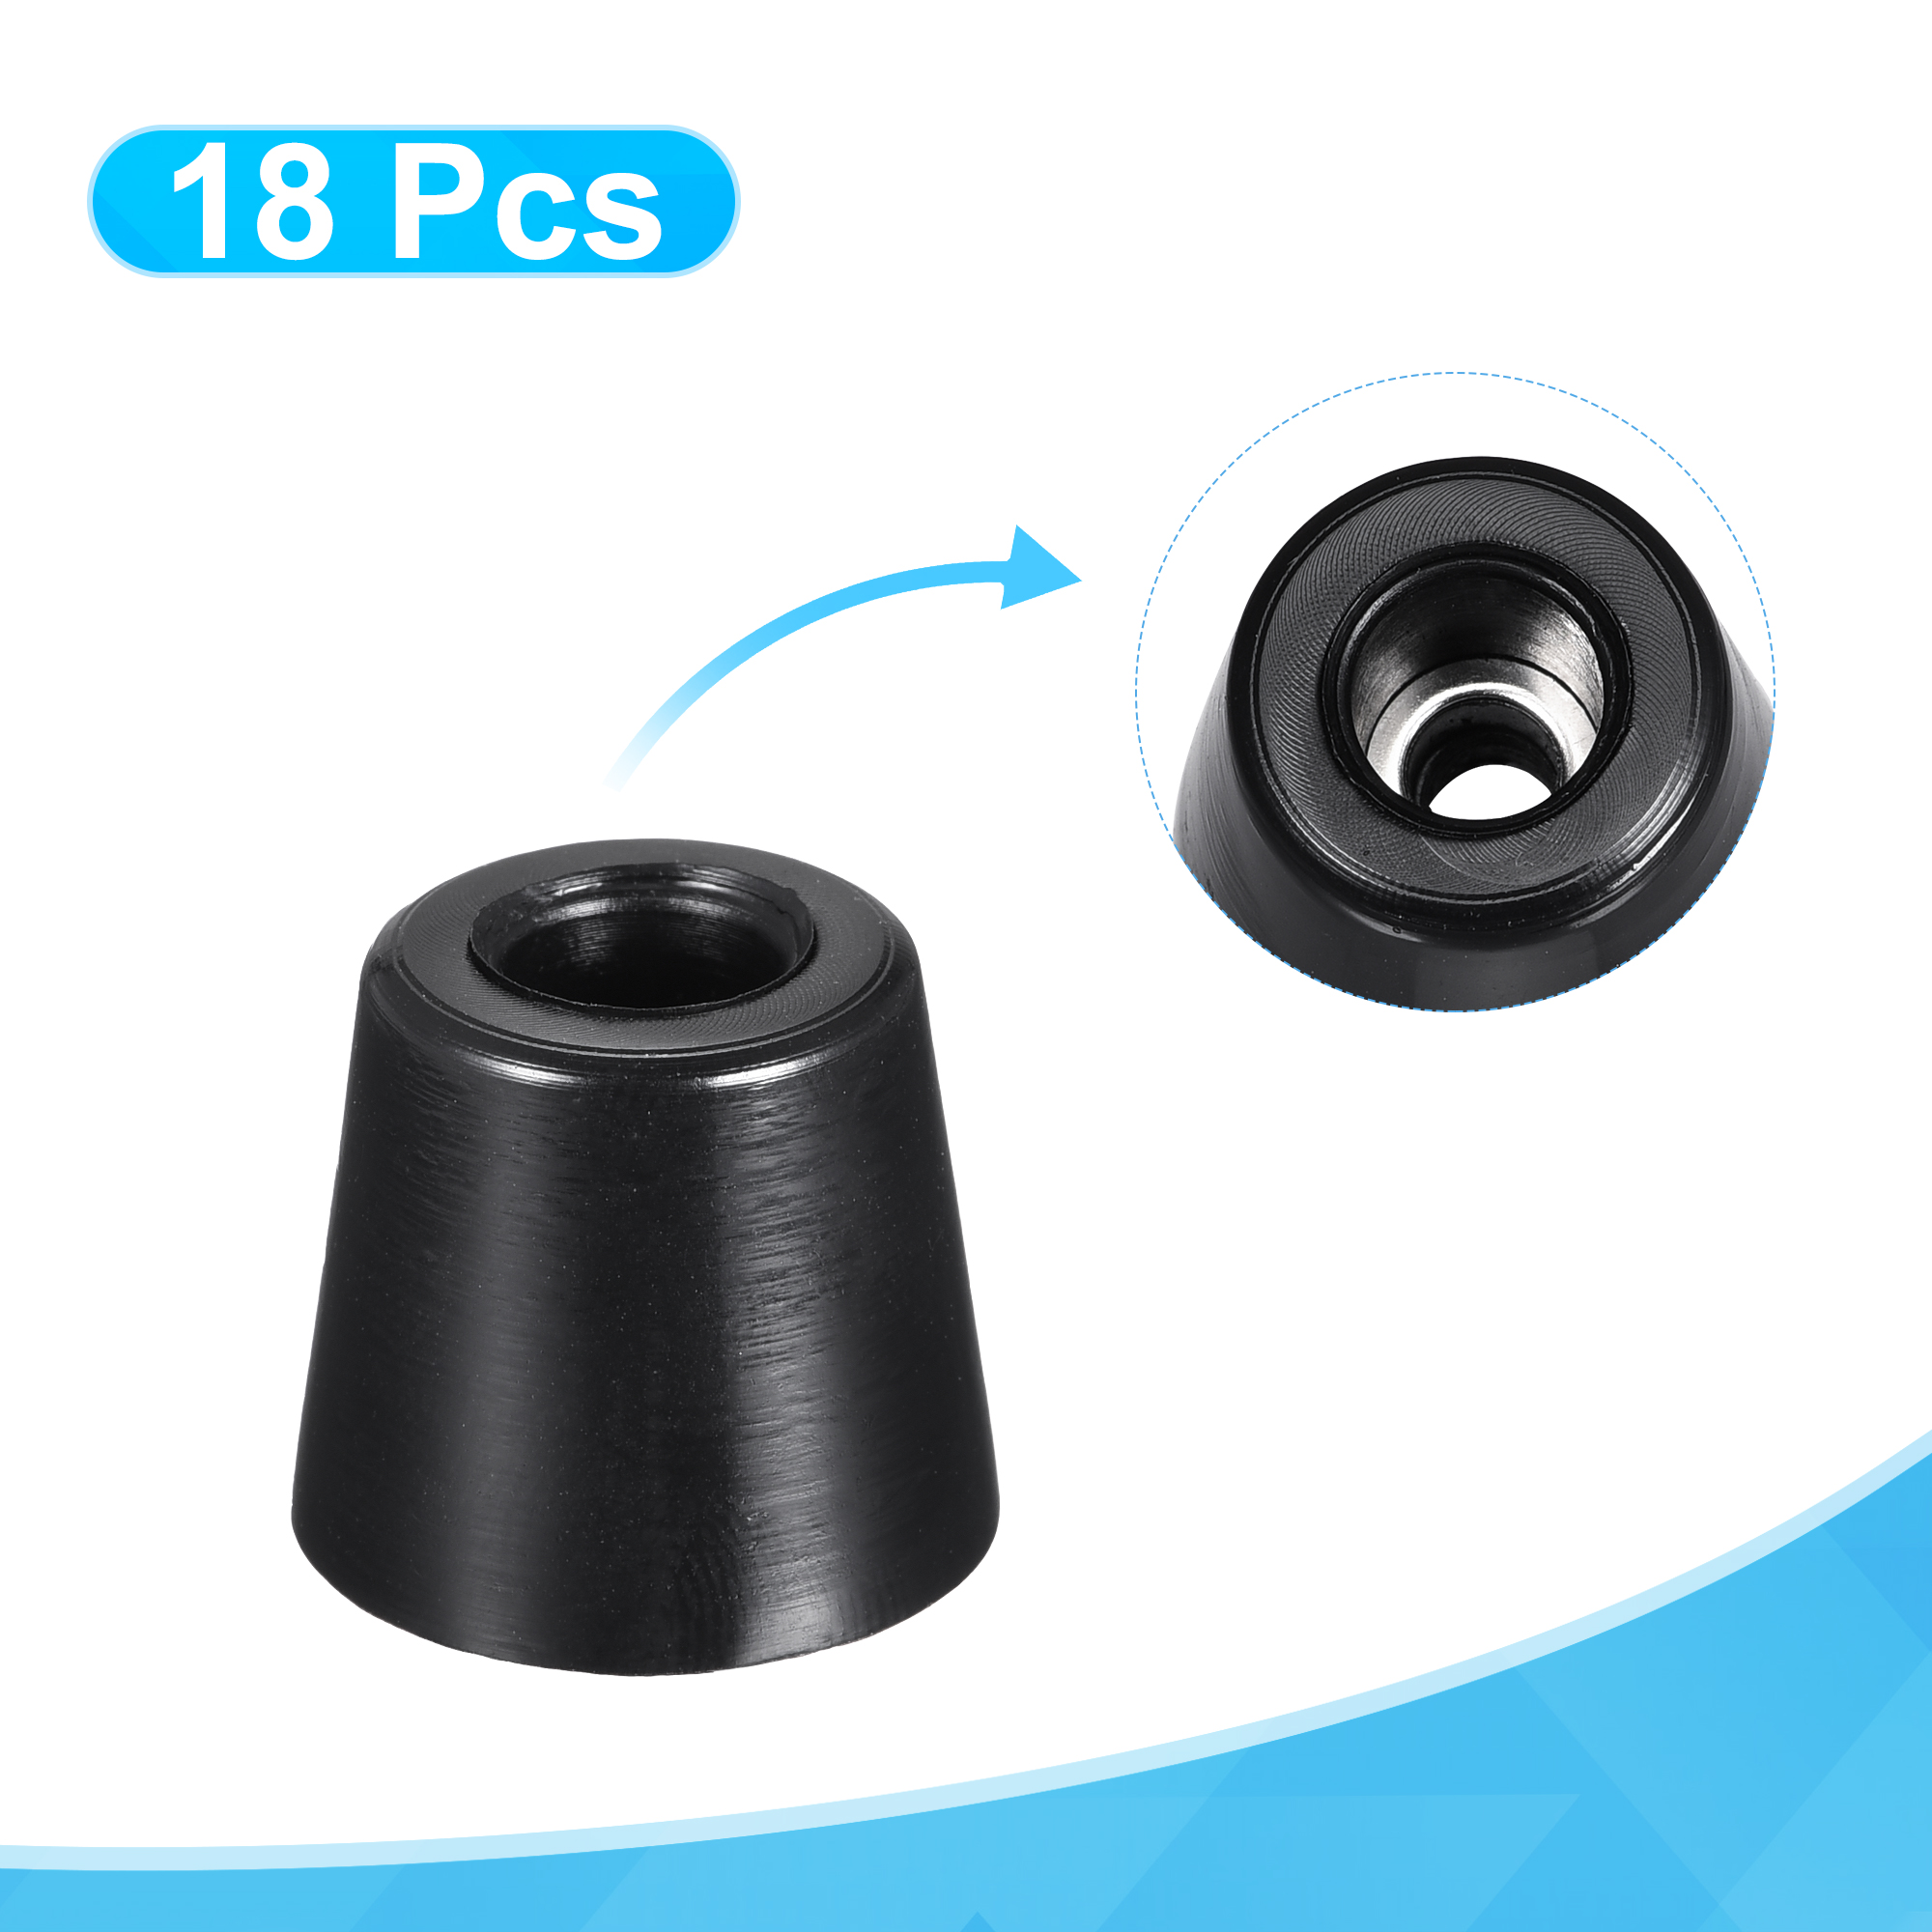 Uxcell 0.75" W x  0.63" H Rubber Bumper Feet, Stainless Steel Screws and Washer 18 Pack - image 4 of 5